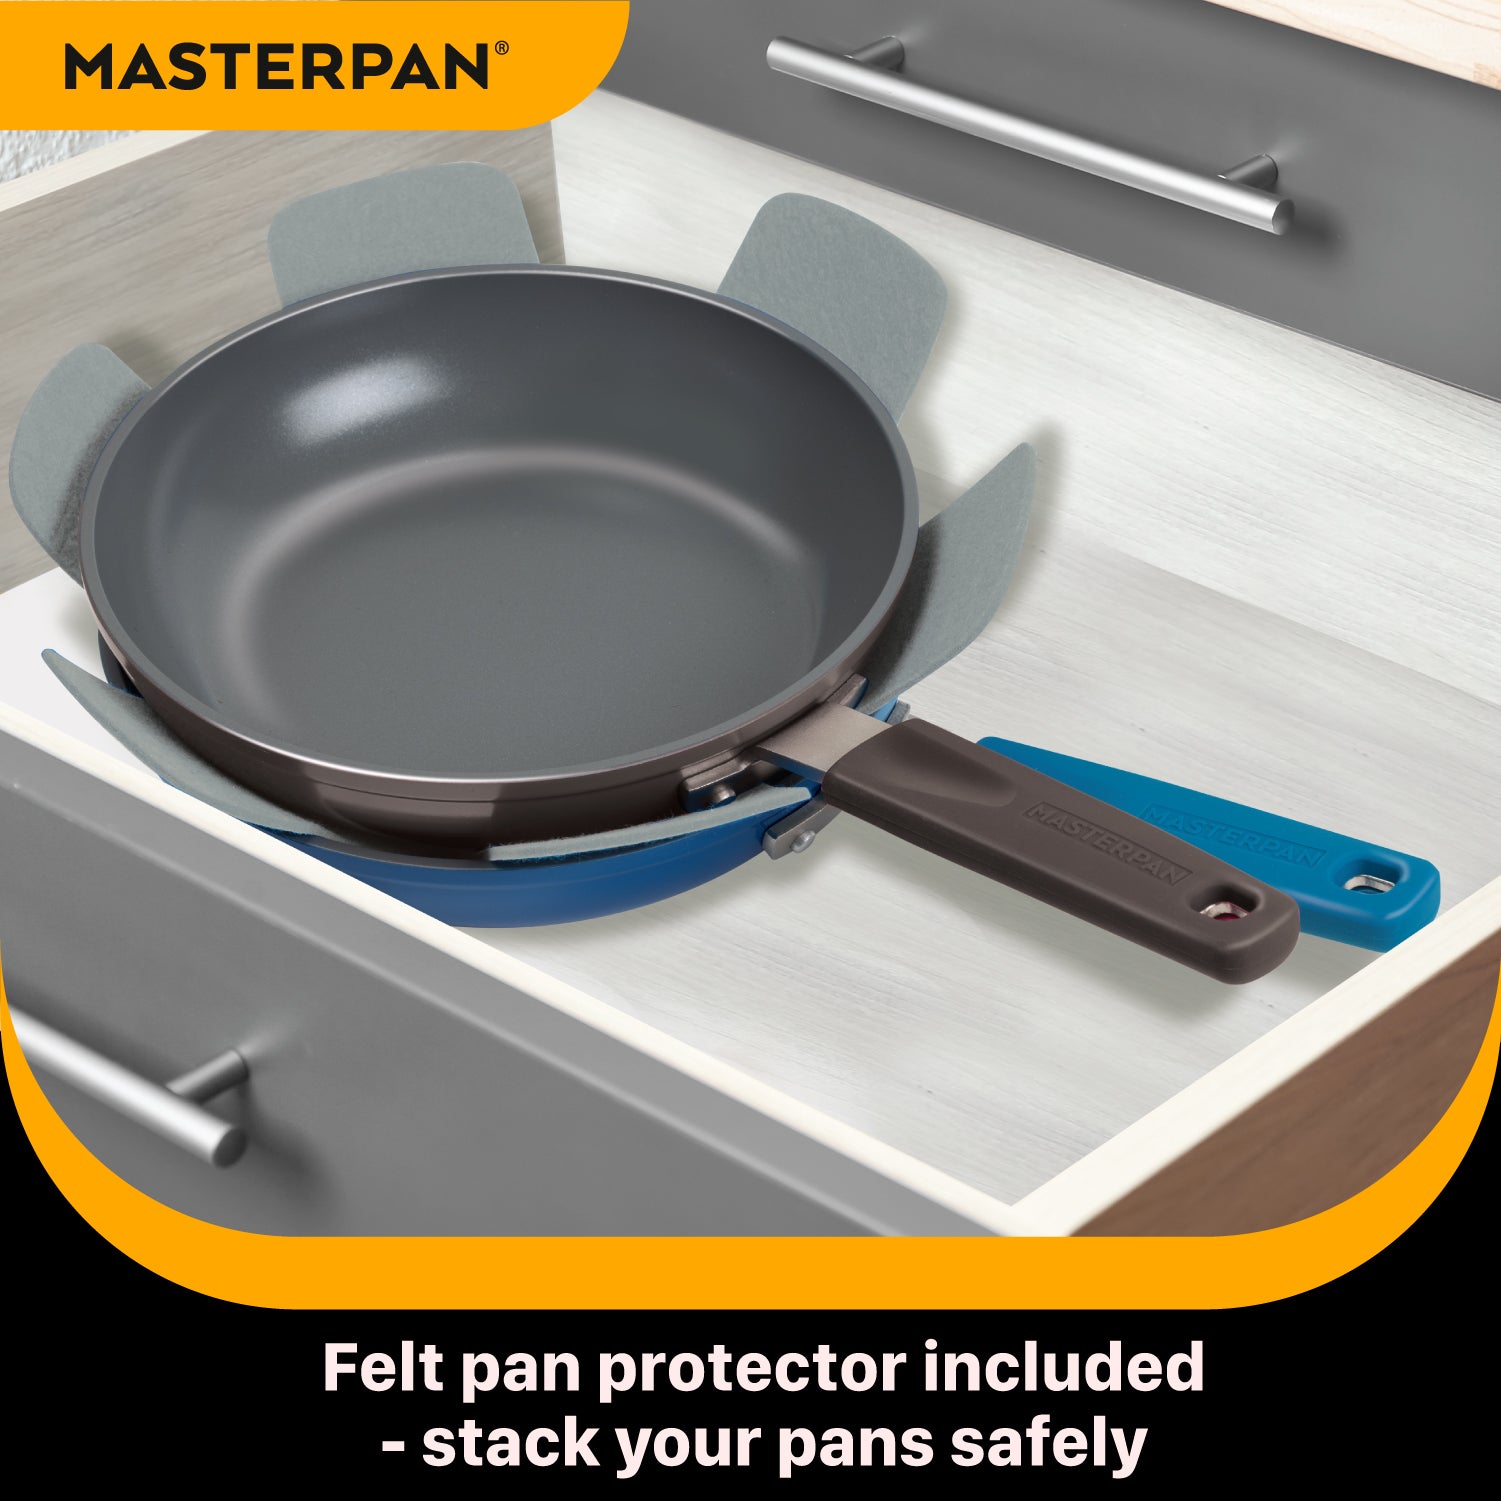 STOVETOP OVEN FRY PAN & SKILLET WITH HEAT-IN STEAM-OUT LID, HEALTHY CERAMIC NON-STICK ALUMINIUM WITH STAINLESS STEEL CHEF’S HANDLE, BONUS 2 UTENSILS AND FELT PAN PROTECTOR INCLUDED, 9.5” (24cm) - CLASSIC GREY